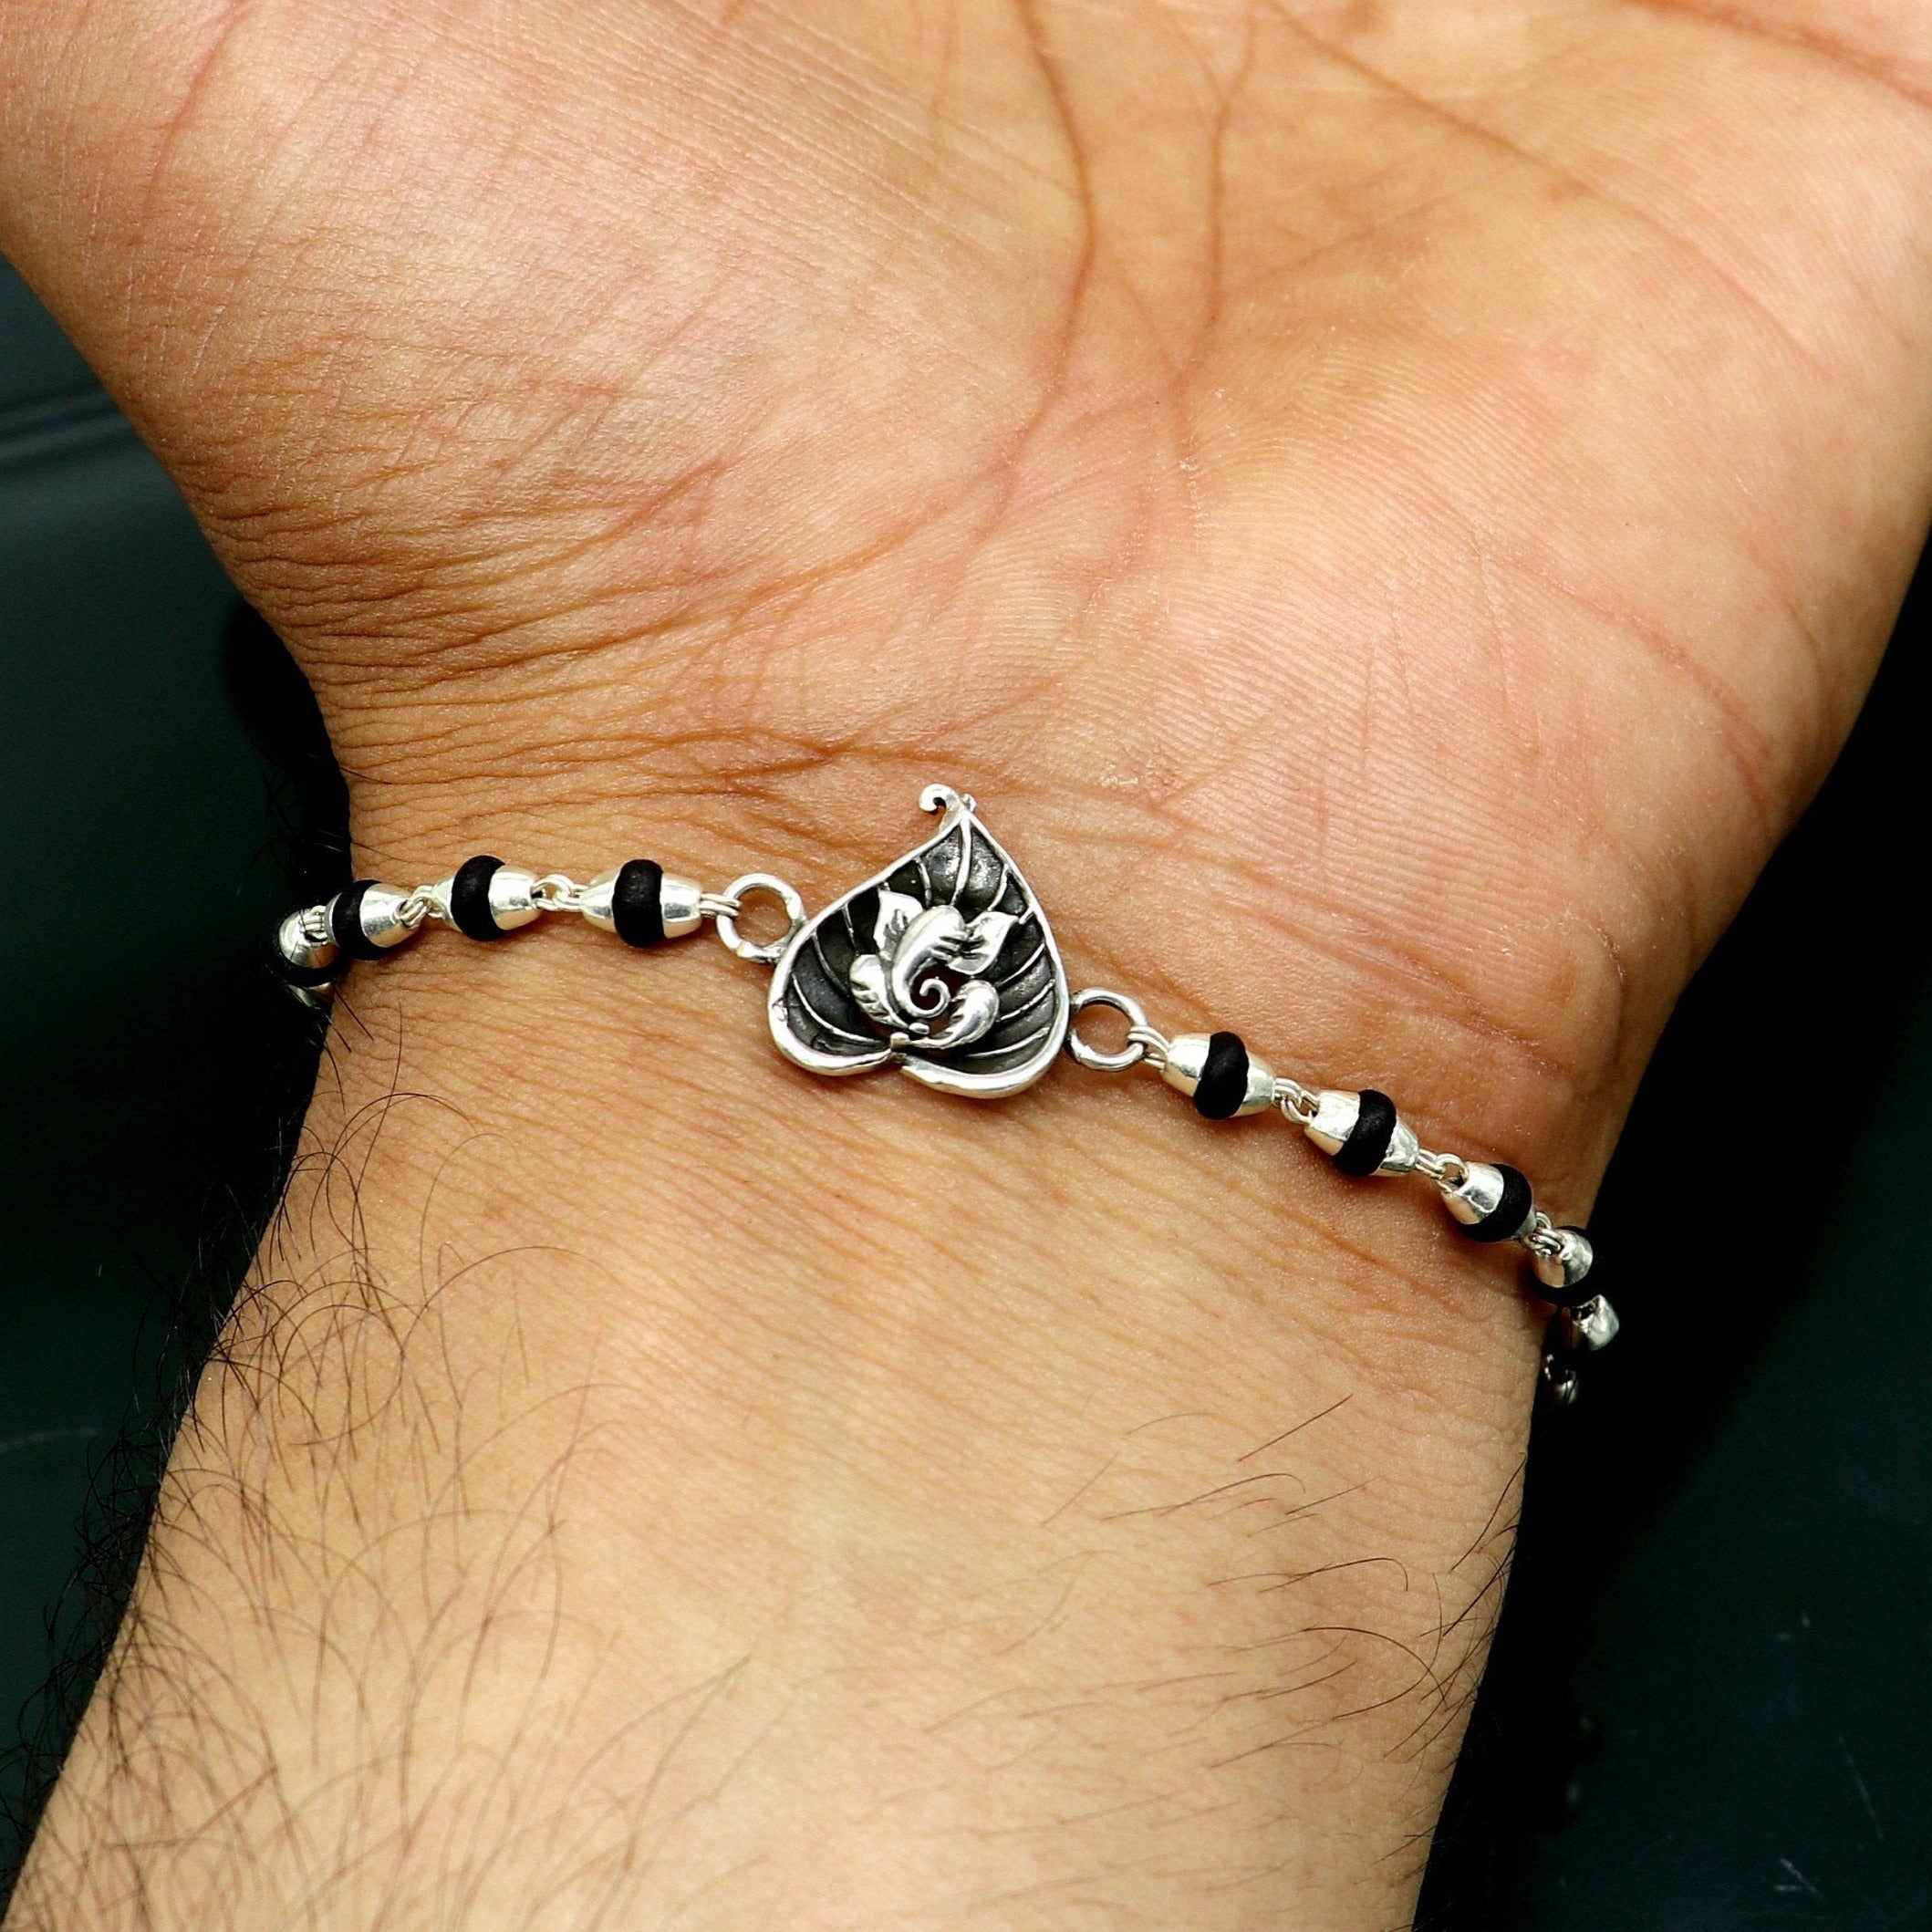 Buy Hem Jewels Pure Silver Rudraksh Bracelet Rakhi with Damru and Trishul  for Brother | Silver Rakhi for Brother | Silver Bracelet for Boys and Men  (HJ_RKH50x1) at Amazon.in